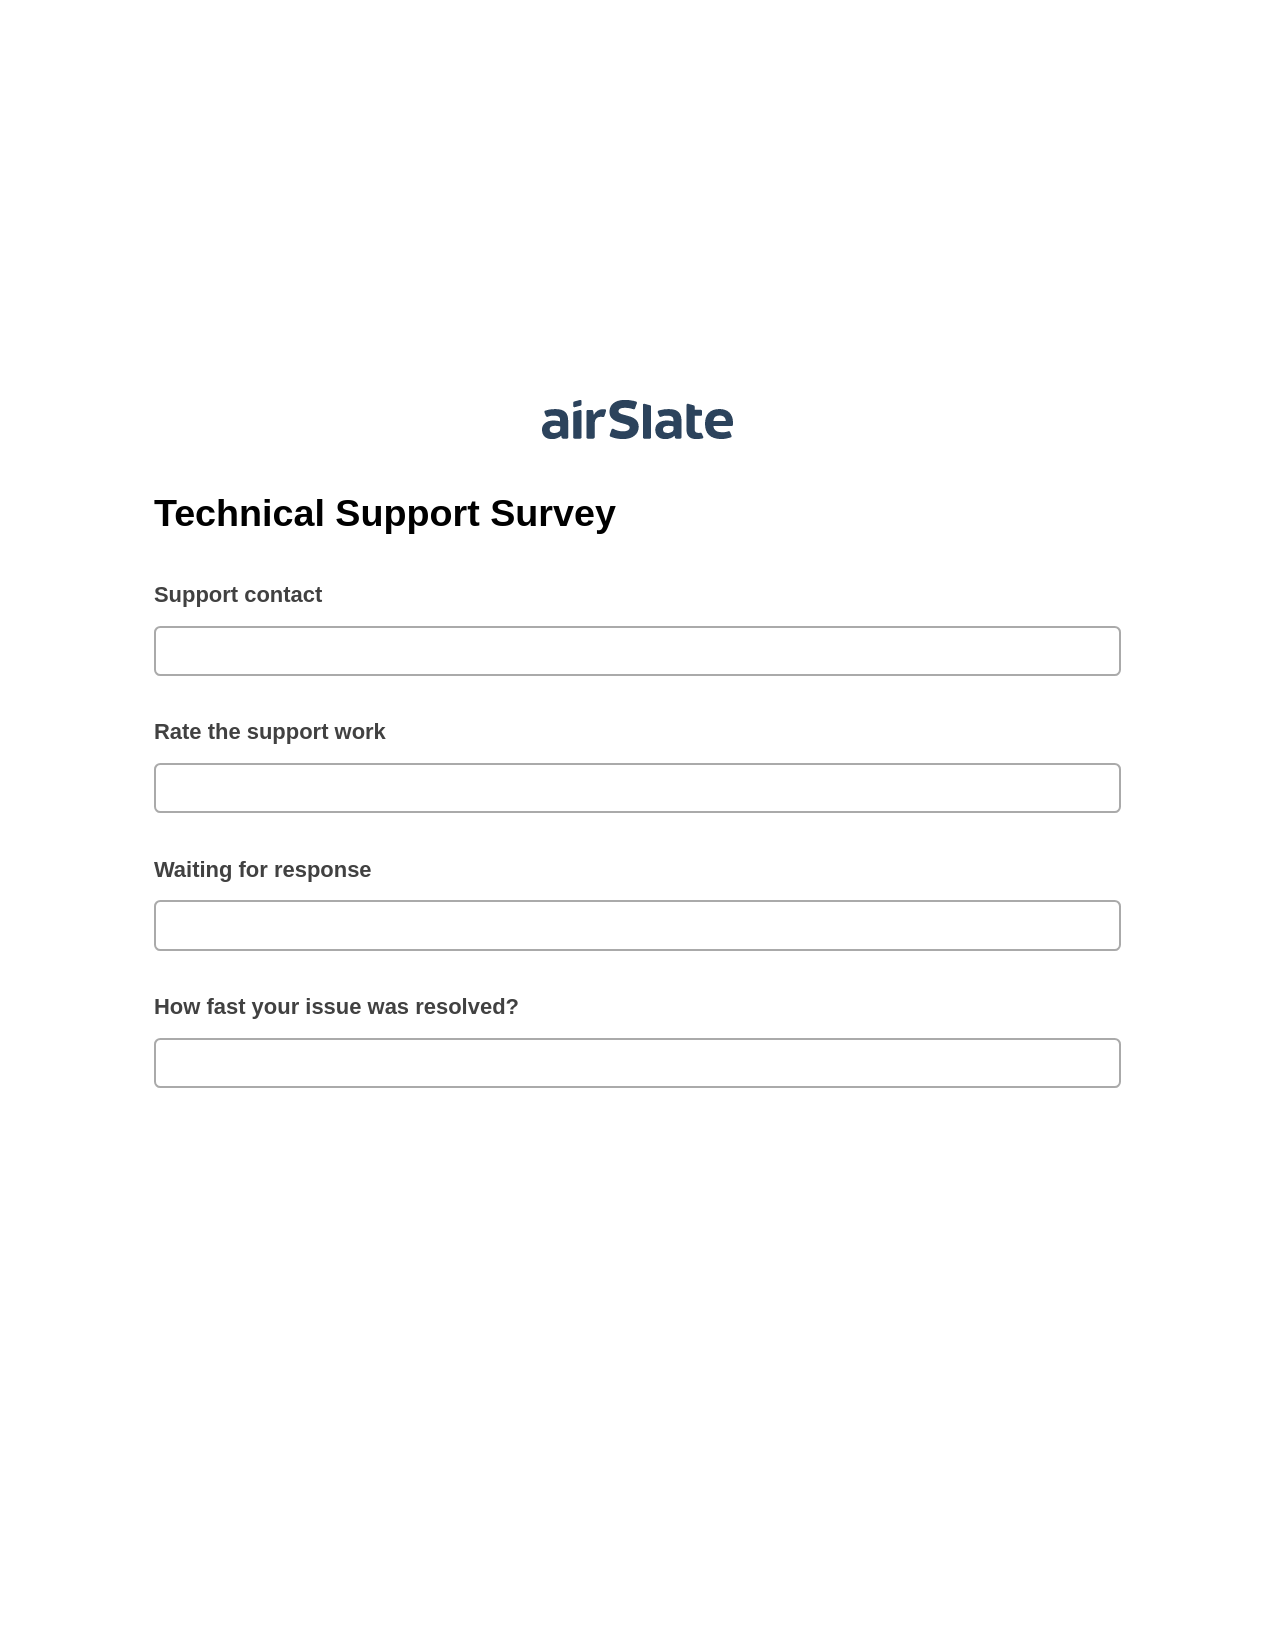 Technical Support Survey Pre-fill from Salesforce Records with SOQL Bot, Create slate from another Flow Bot, Export to WebMerge Bot